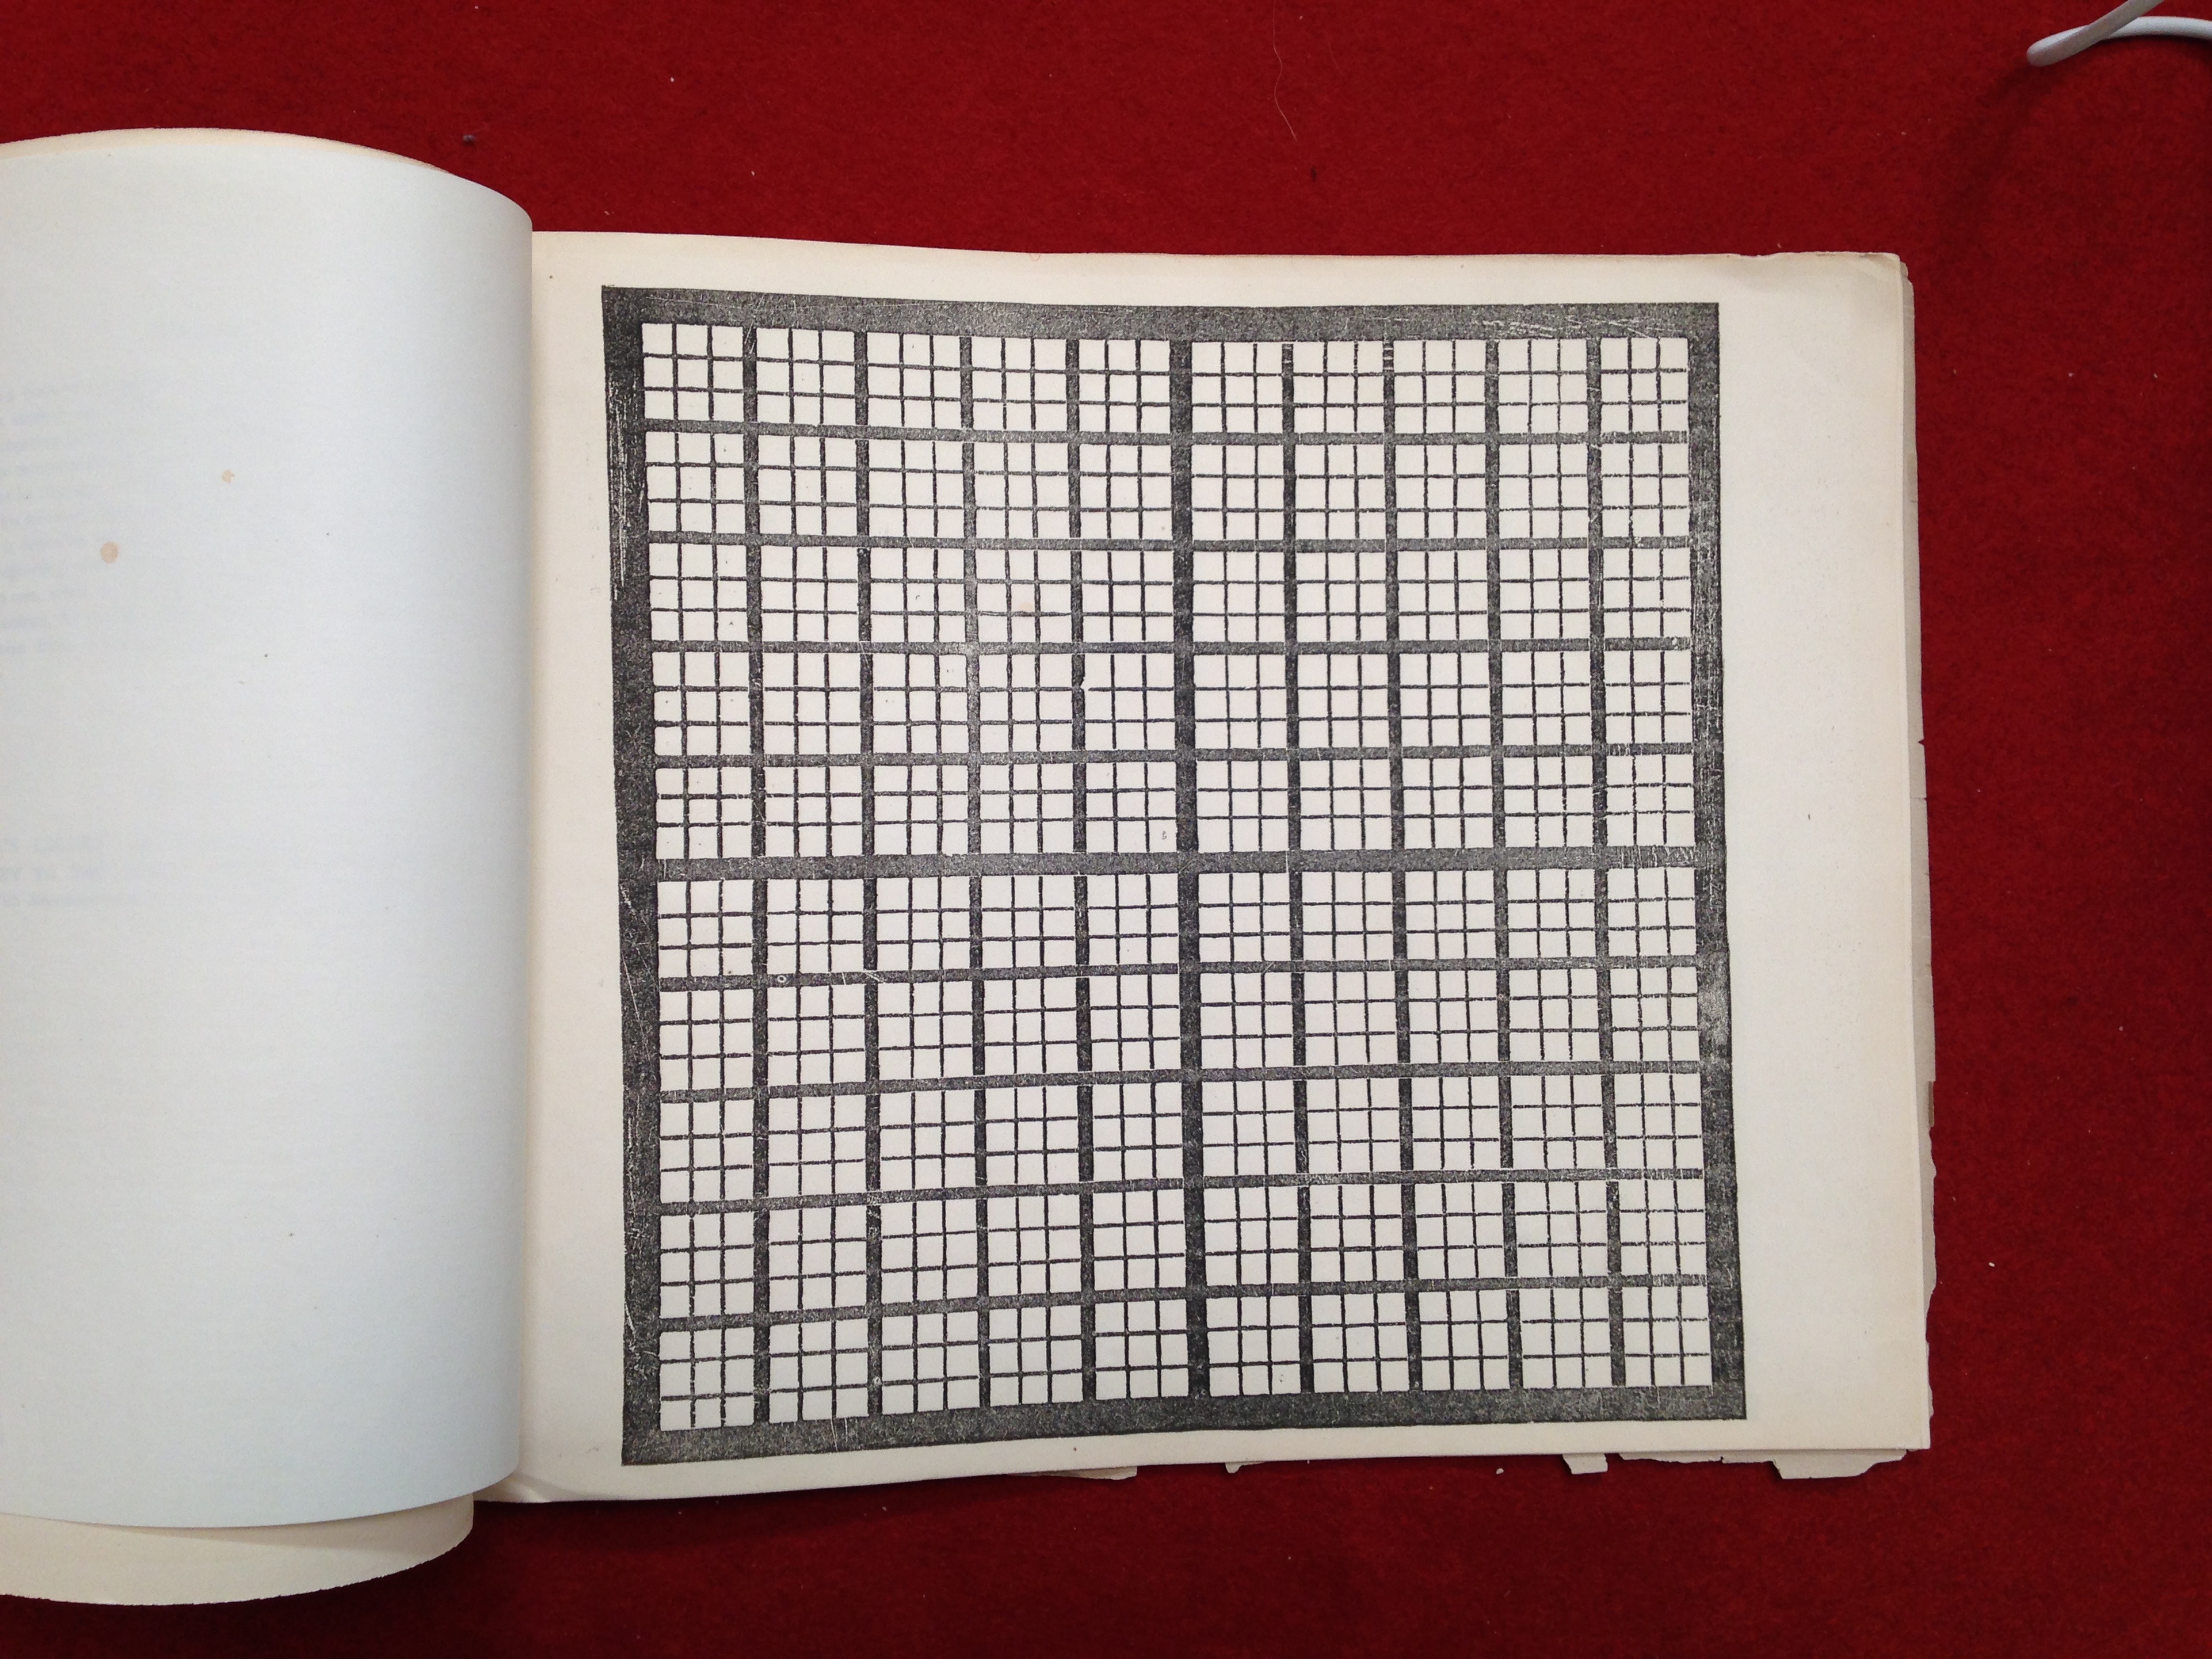 A photo of a blank chart from a page of Peabody’s workbooks, set against a red backdrop.